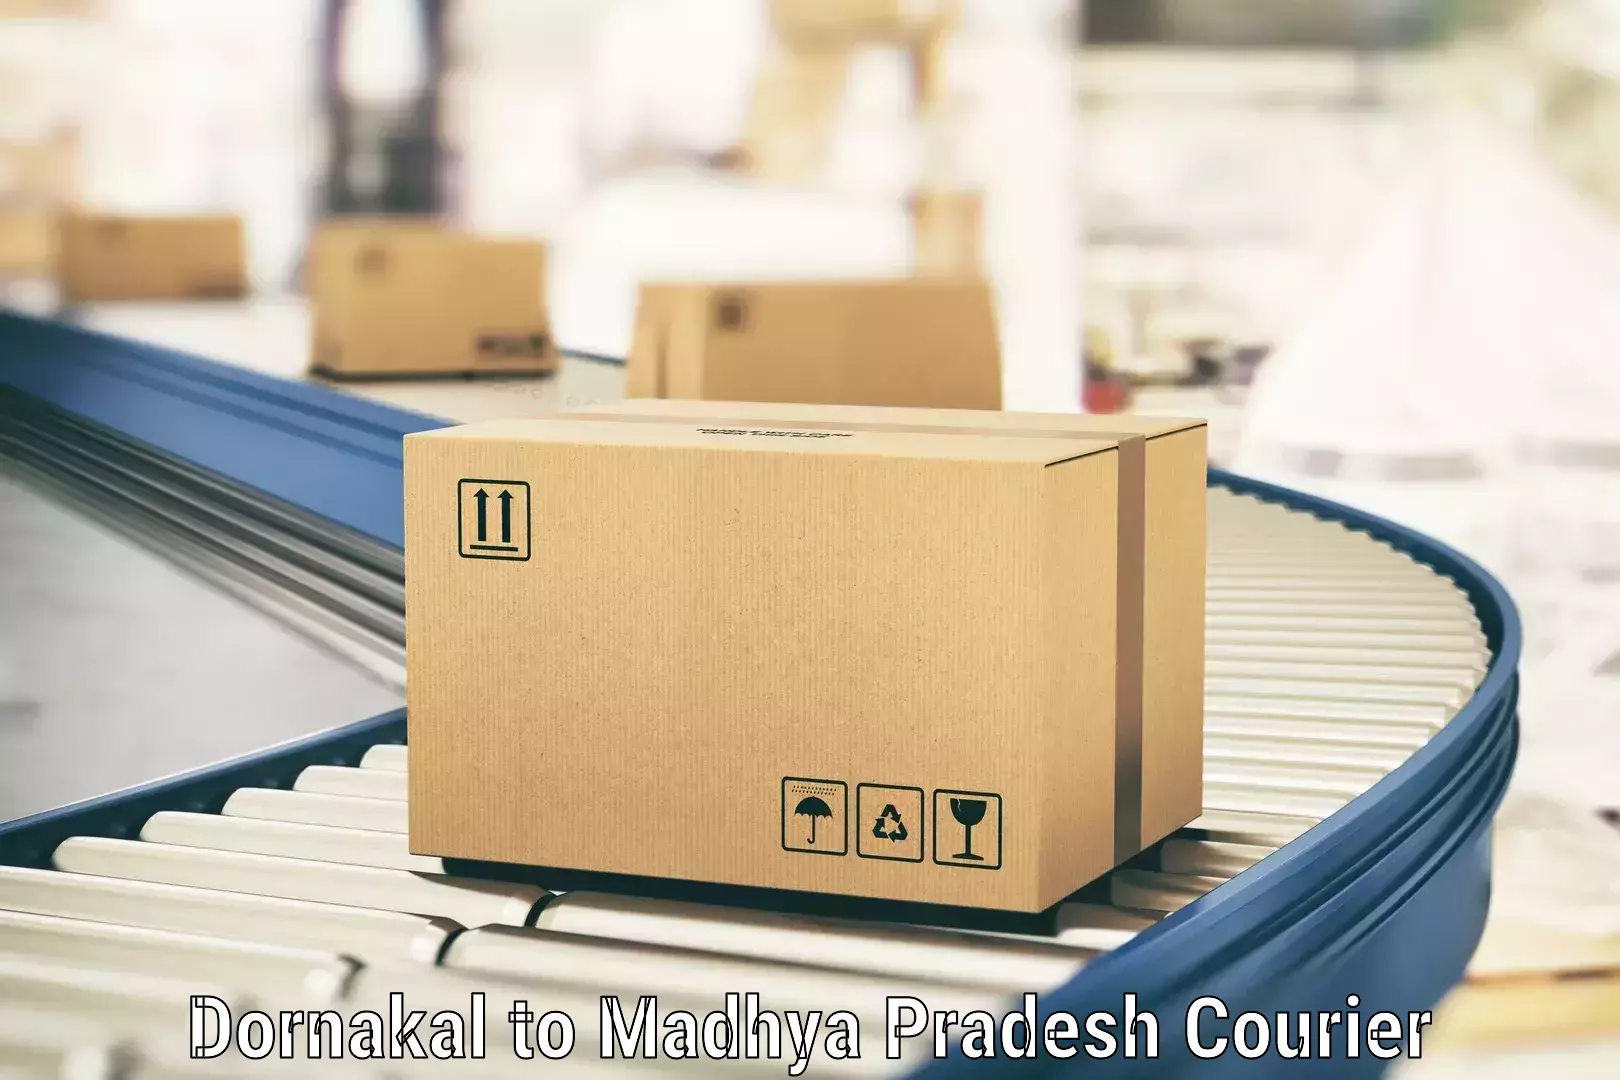 Automated parcel services Dornakal to Chhatarpur